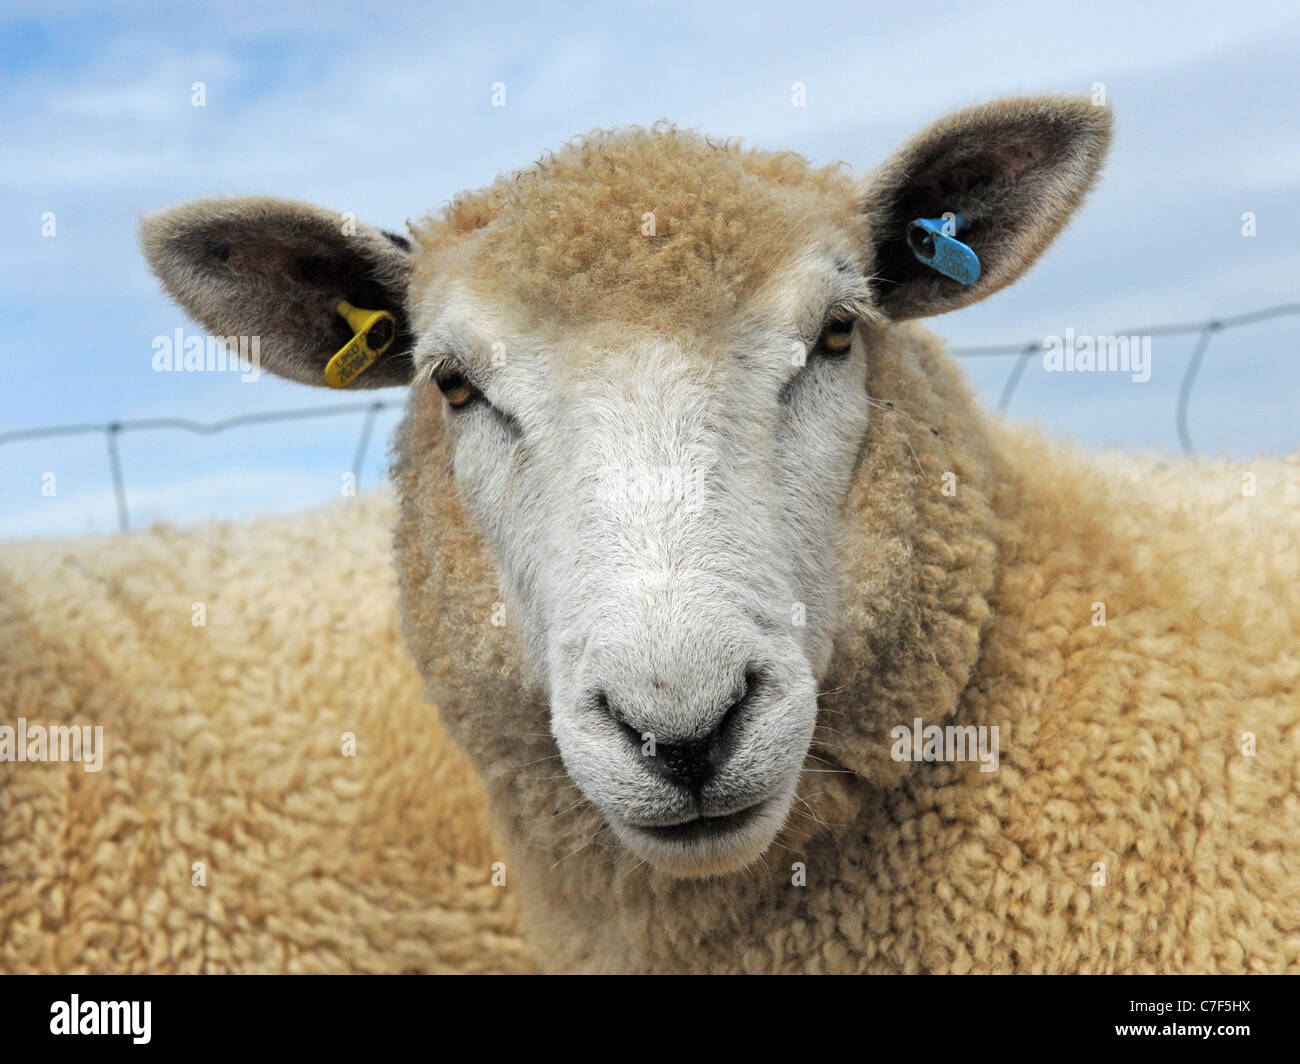 An angry looking sheep with light brown fleece Stock Photo